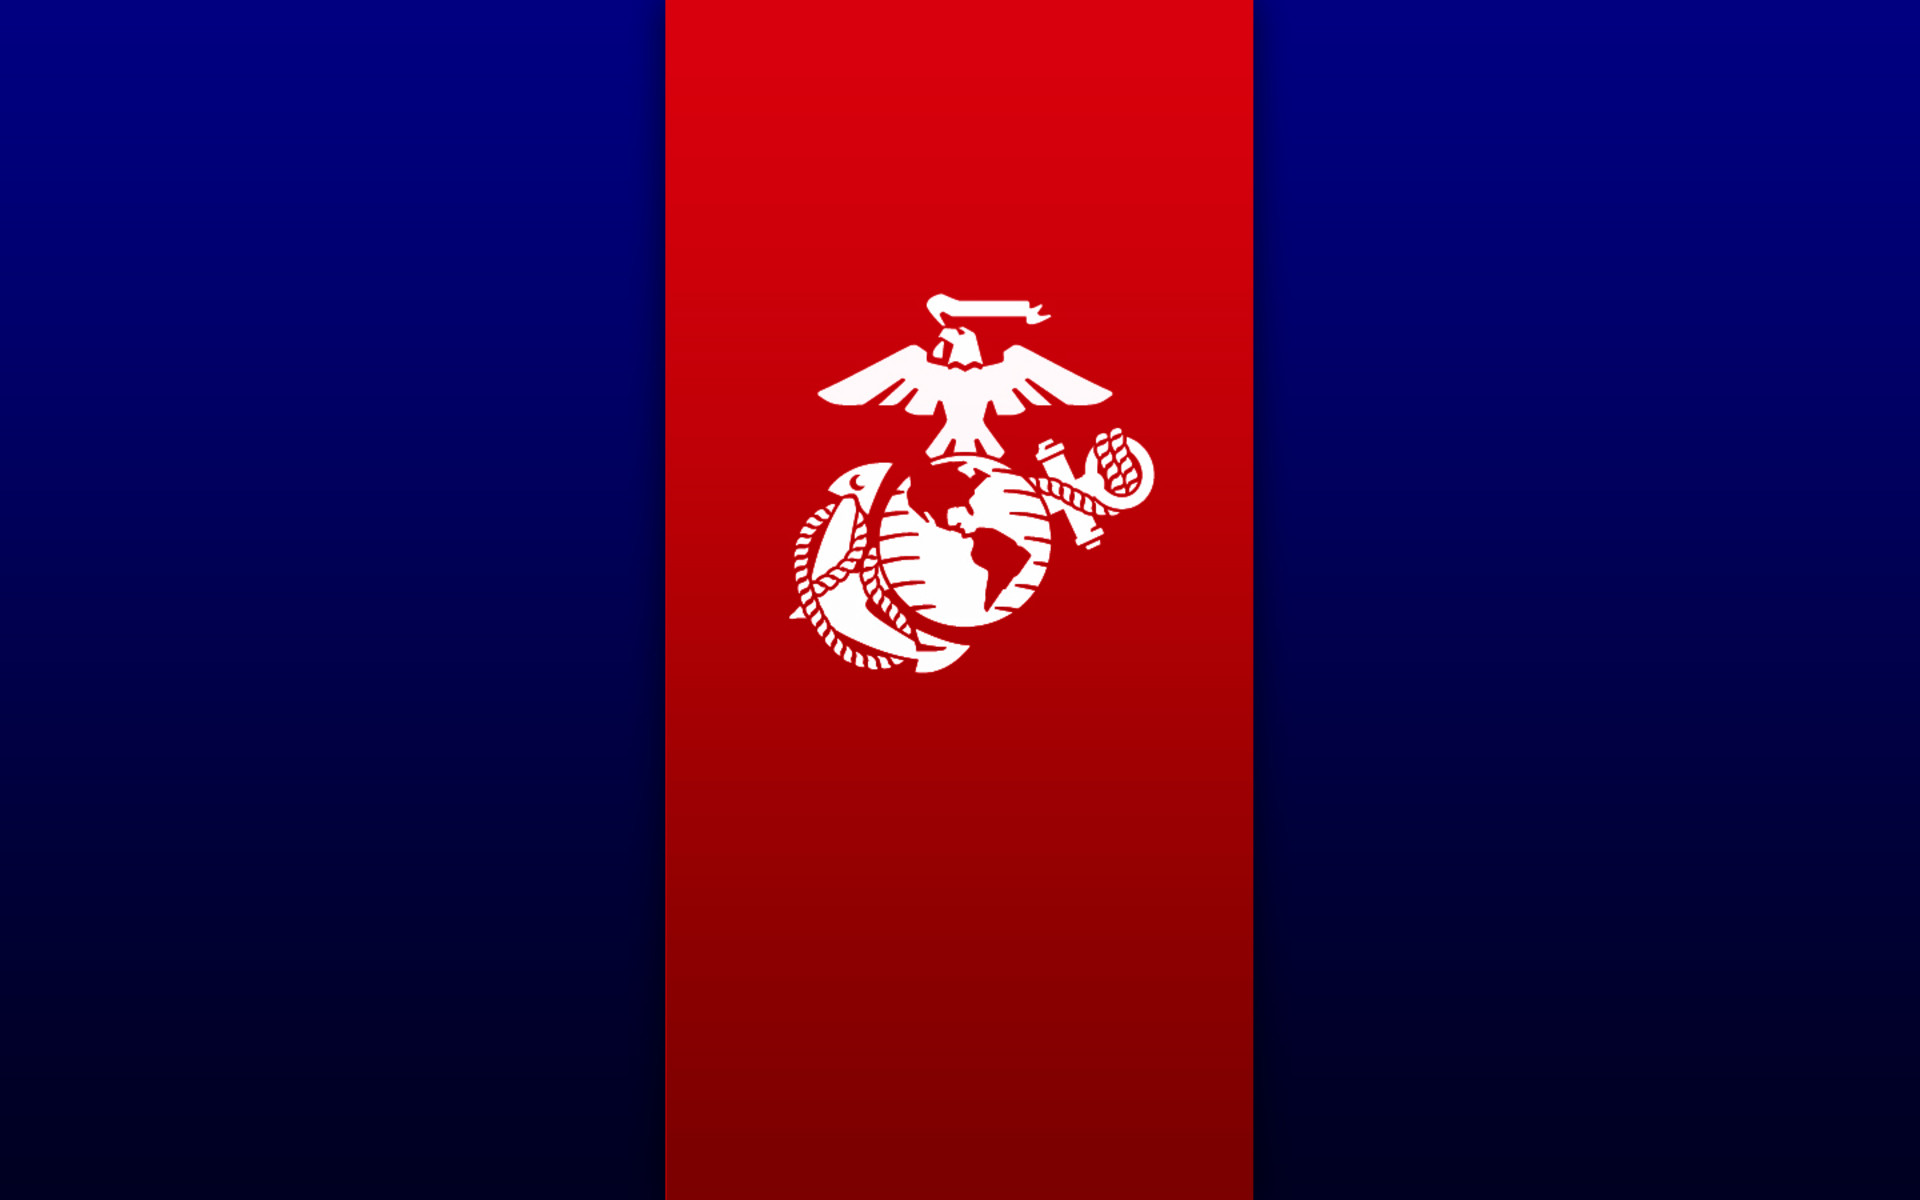 1920×1440 Px HD Desktop Wallpaper Wallpapers Usmc Red And Blue Background